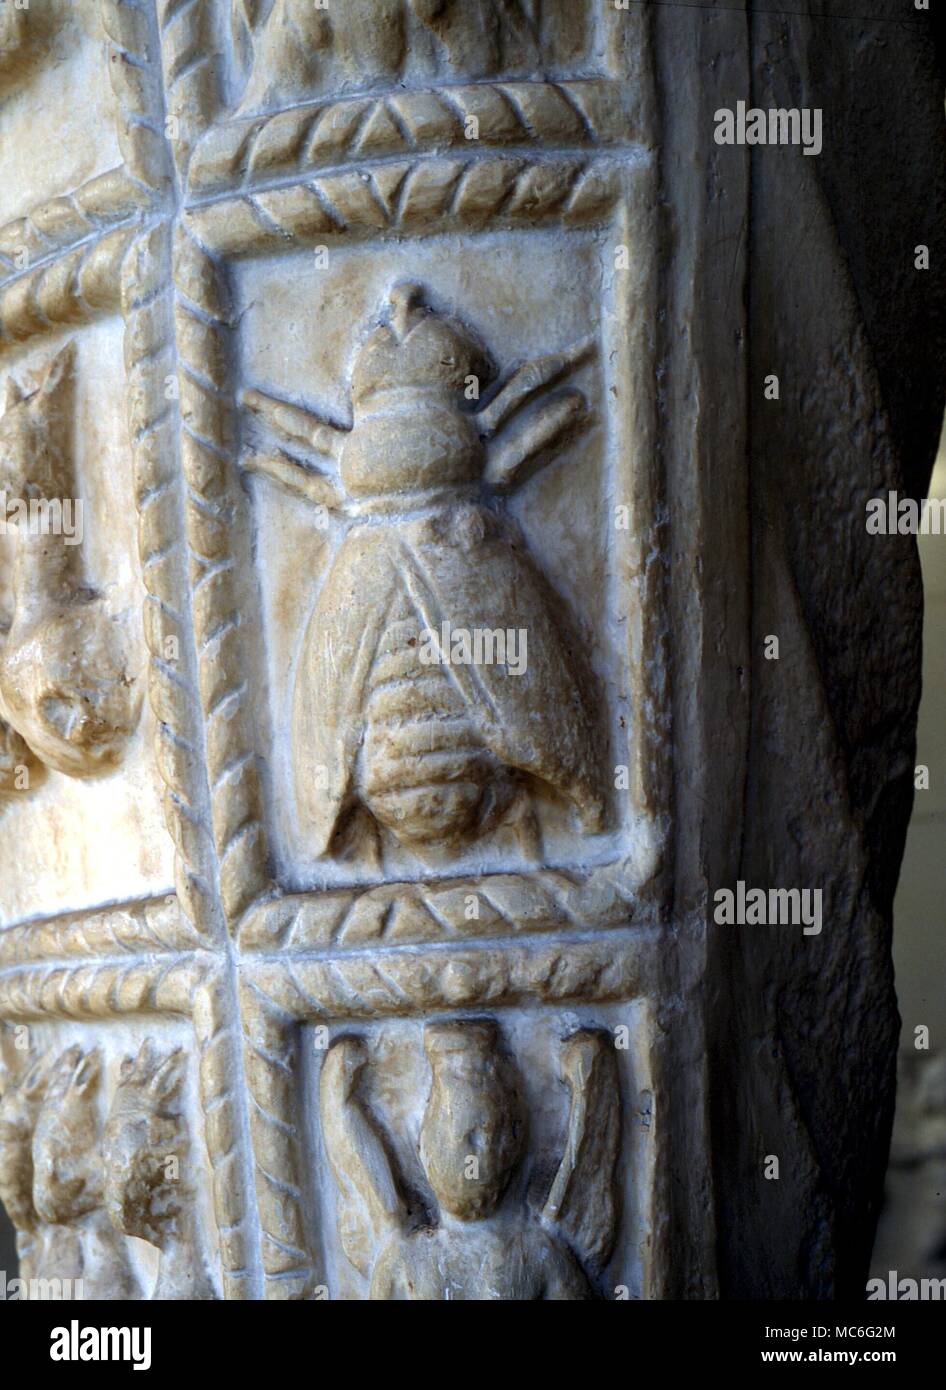 ANIMALS - Bees on the sacred dress of Diana of Ephesus relate to the human soul: the temperature of the hive is the same as that of the human body, and the bees that 'dwell in the hive' were seen as the human soul, dwelling in the body Stock Photo